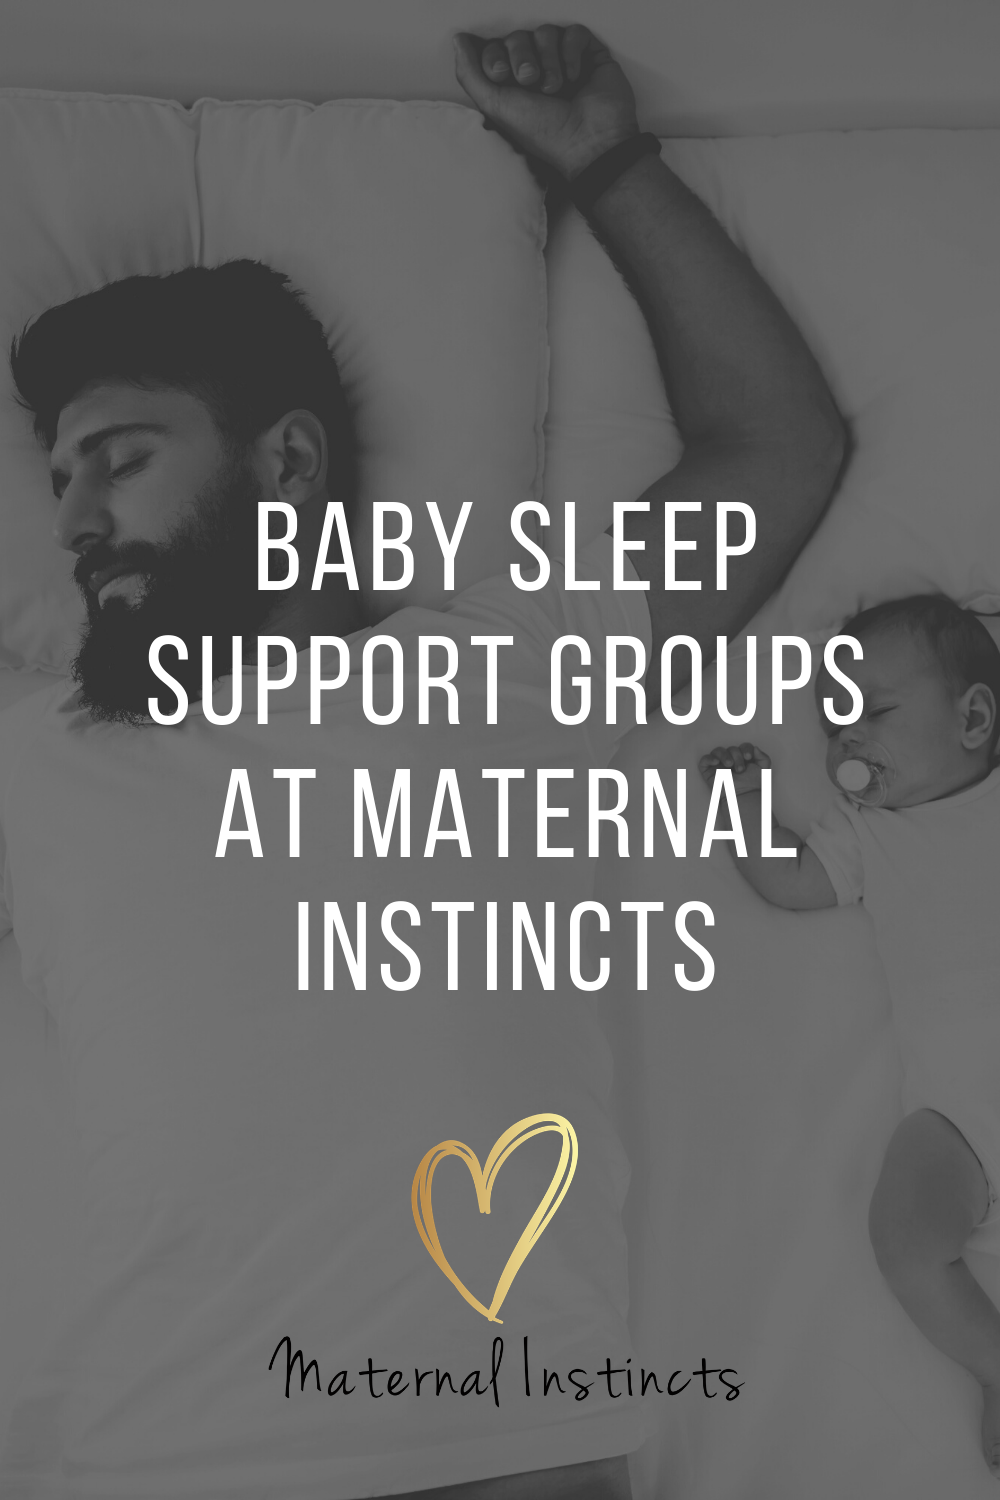 Baby Sleep Support Groups at Maternal Instincts